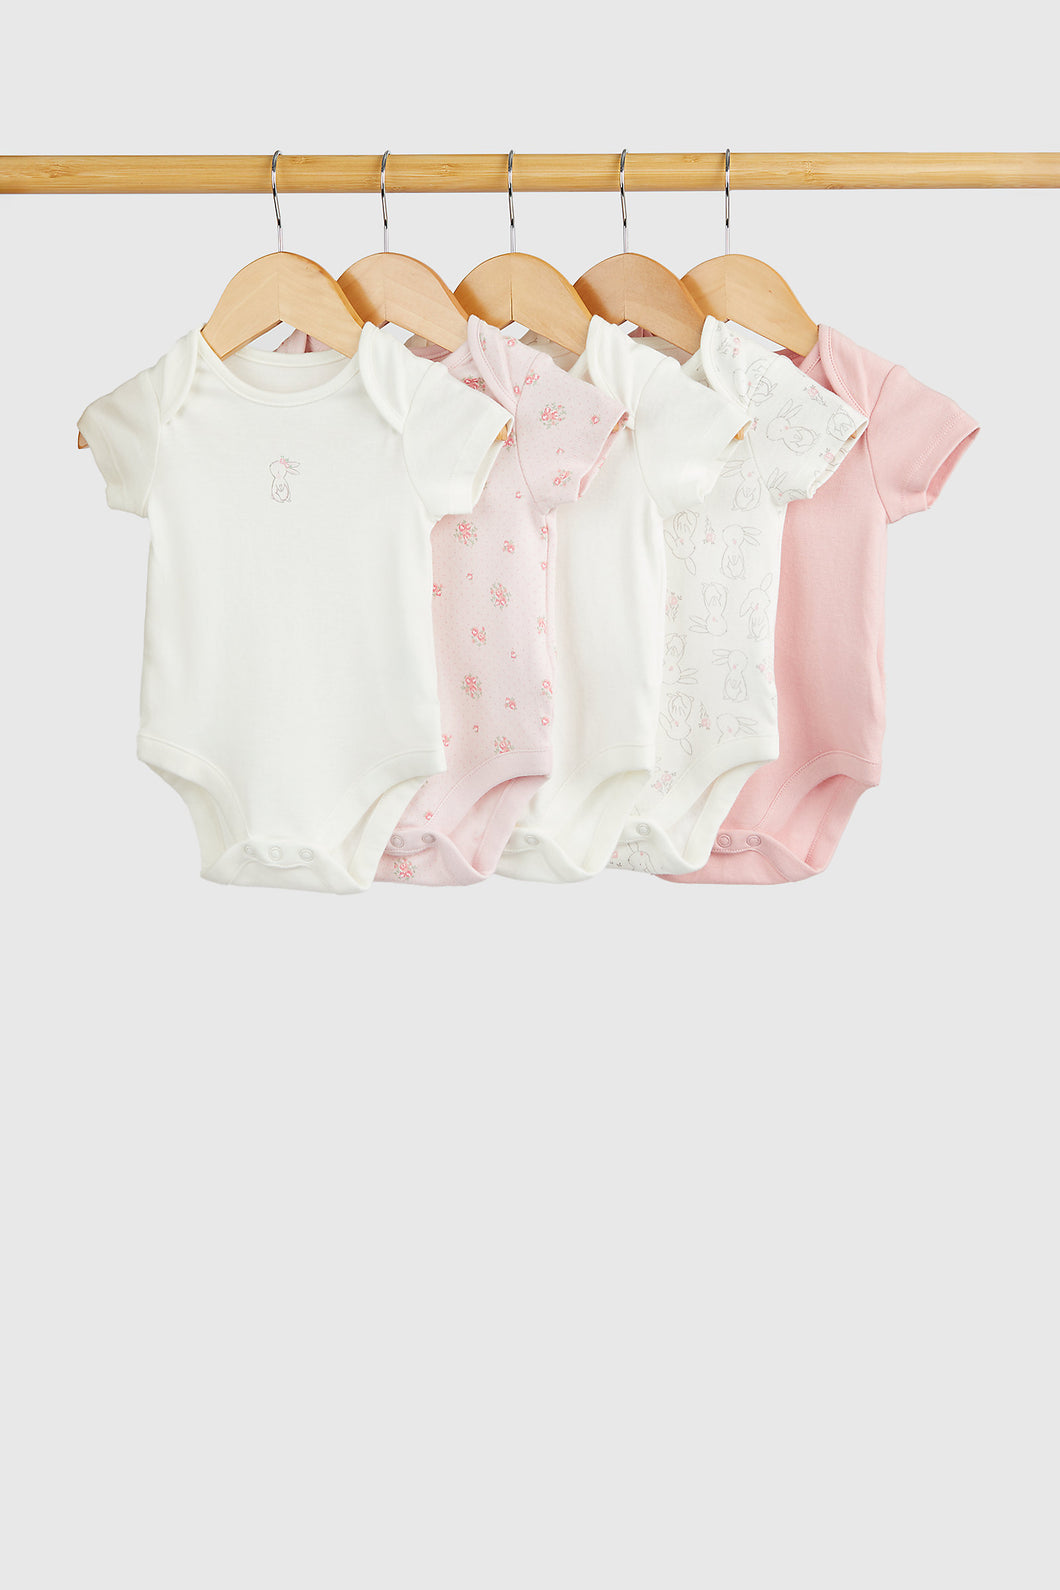 Mothercare Floral Bunny Short-Sleeved Bodysuits - 5 Pack